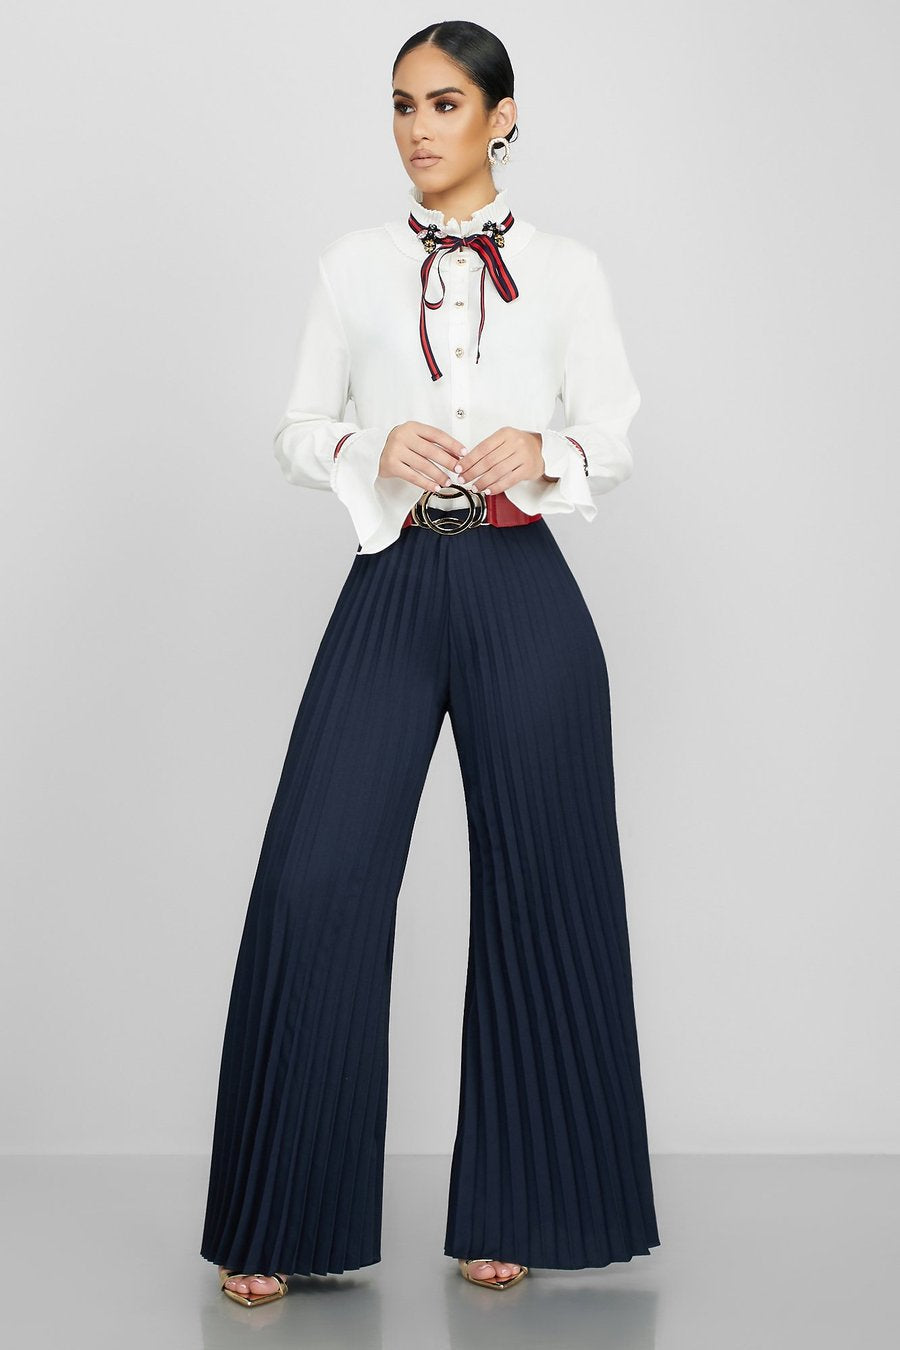 Women Clothing Fashion Street Hipster Pleated Pants Wide Leg Pants